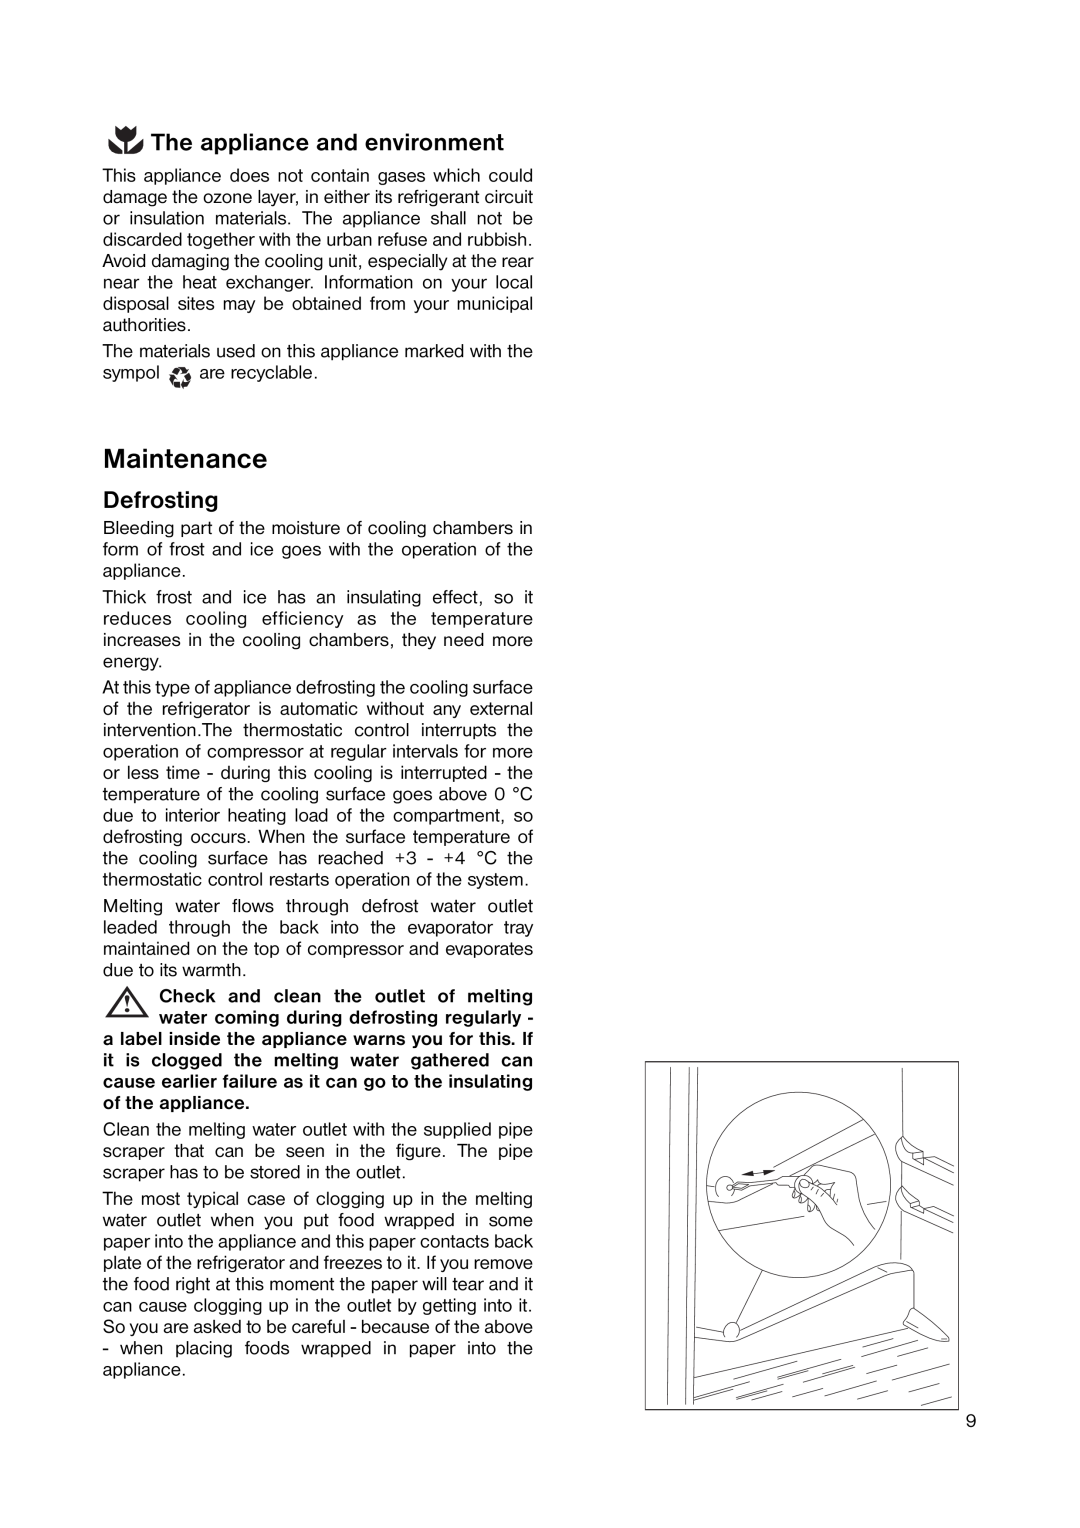 Zanussi ZERB 8643 manual Maintenance, The appliance and environment, Defrosting 